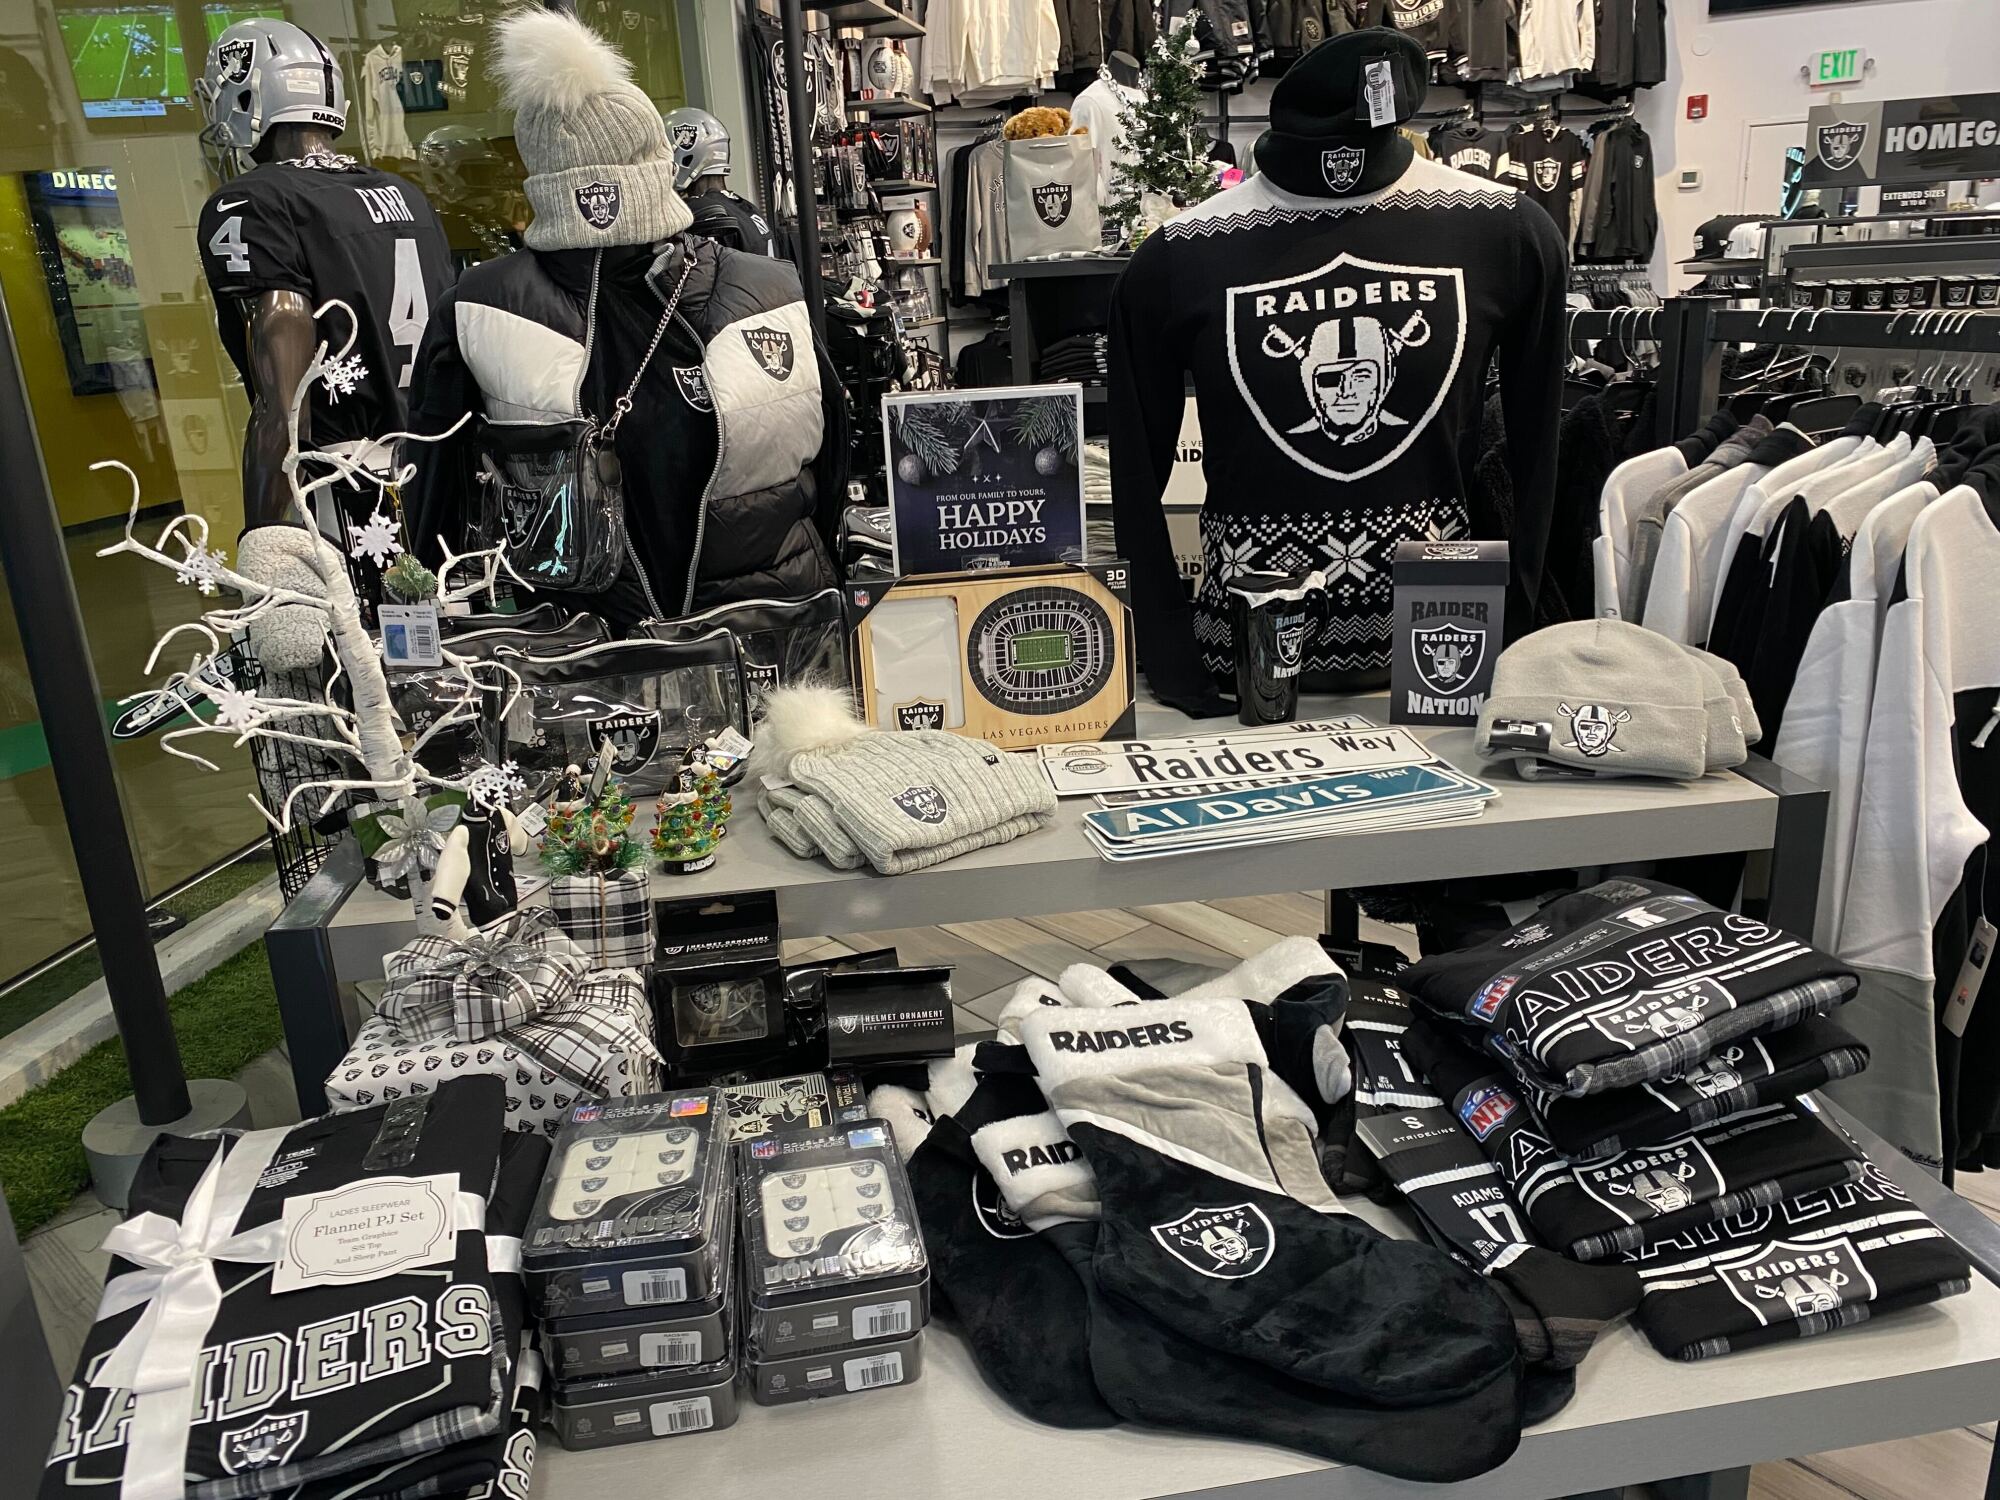 Items for sale at the Raider Image store at Universal CityWalk